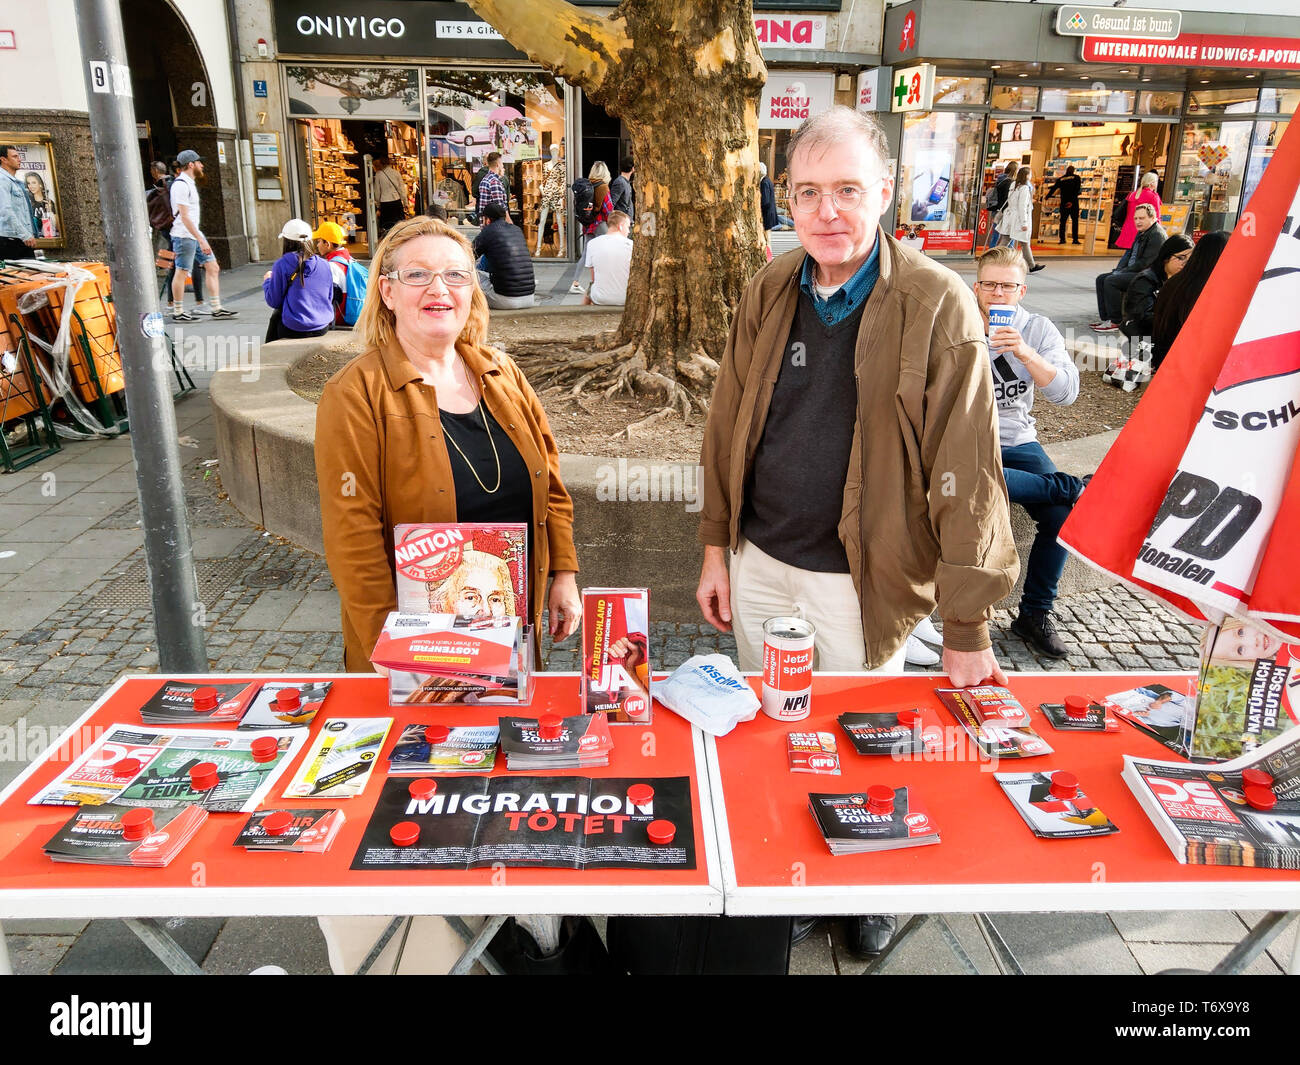 Munich, Bavaria, Germany. 2nd May, 2019. Renate Werlberger and Karl Richter of the neonazi NPD and BIA respectively while holding an information session for the NPD with ''migration kills'' on the table. The neonazi NPD party organized an information table in one of the most-traveled districts of Munich- the pedestrian zone in the city center where shoppers, tourists and workers cross. Behind the table was Munich city councilman Karl Richter, part of the neonazi group Buergerinitiativ Auslaender Stopp (Citizen Initiative to Stopp Foreigners) and Renate Werlberger of the NPD. Both parties ar Stock Photo